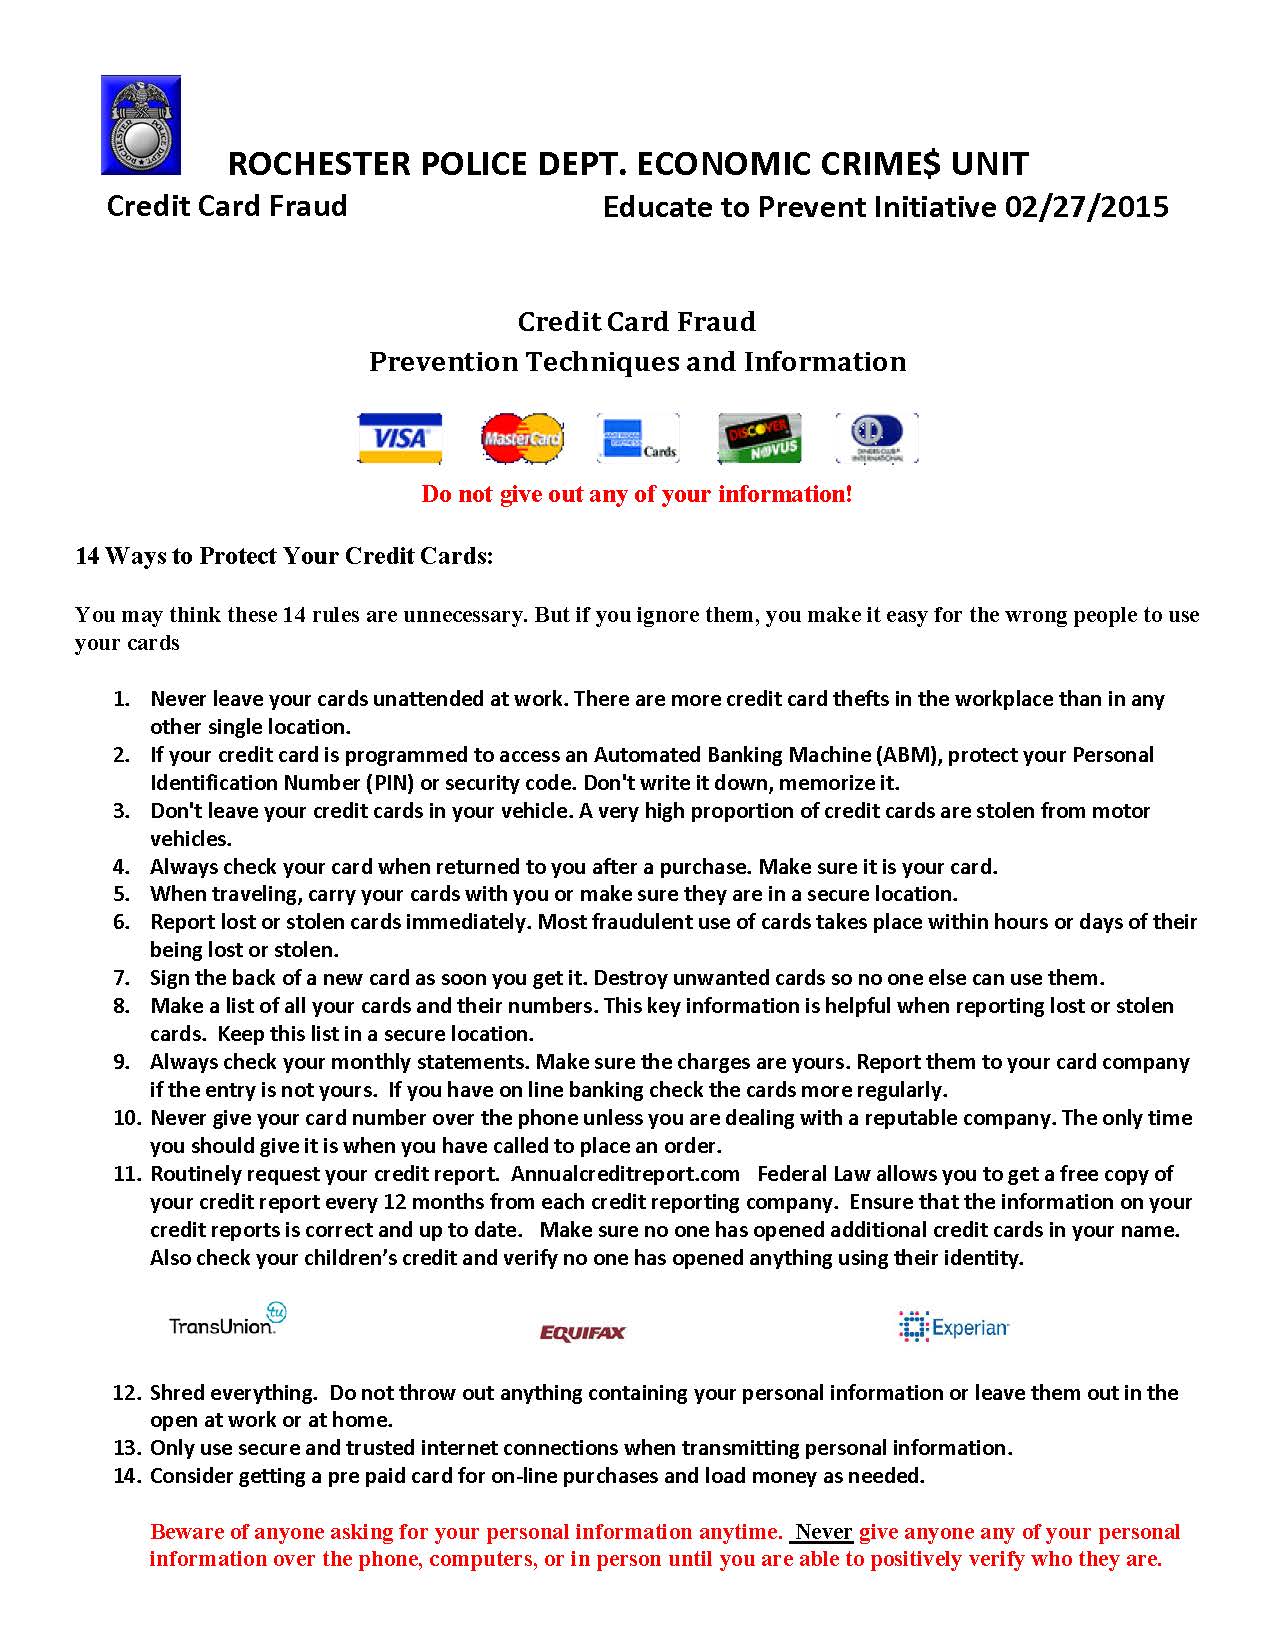 How To File A Credit Card Fraud Police Report ...